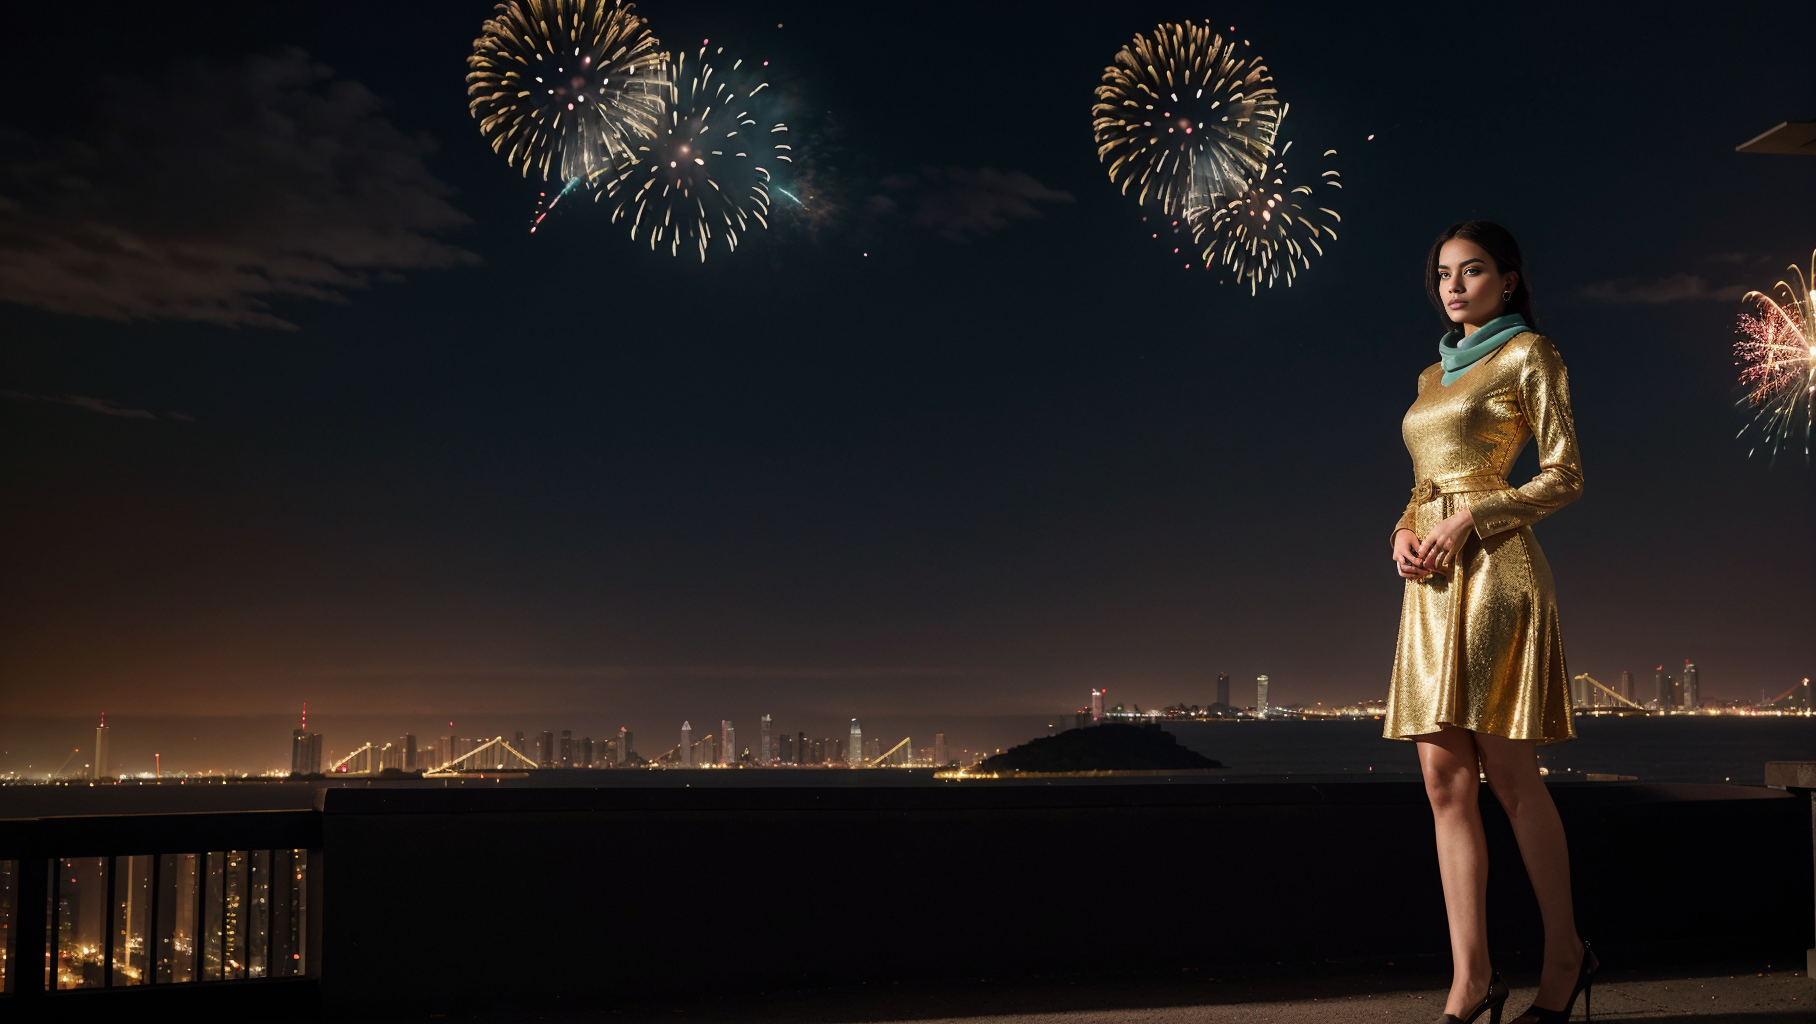 Woman in a glittering gold dress overlooking a city skyline with New Year's fireworks.